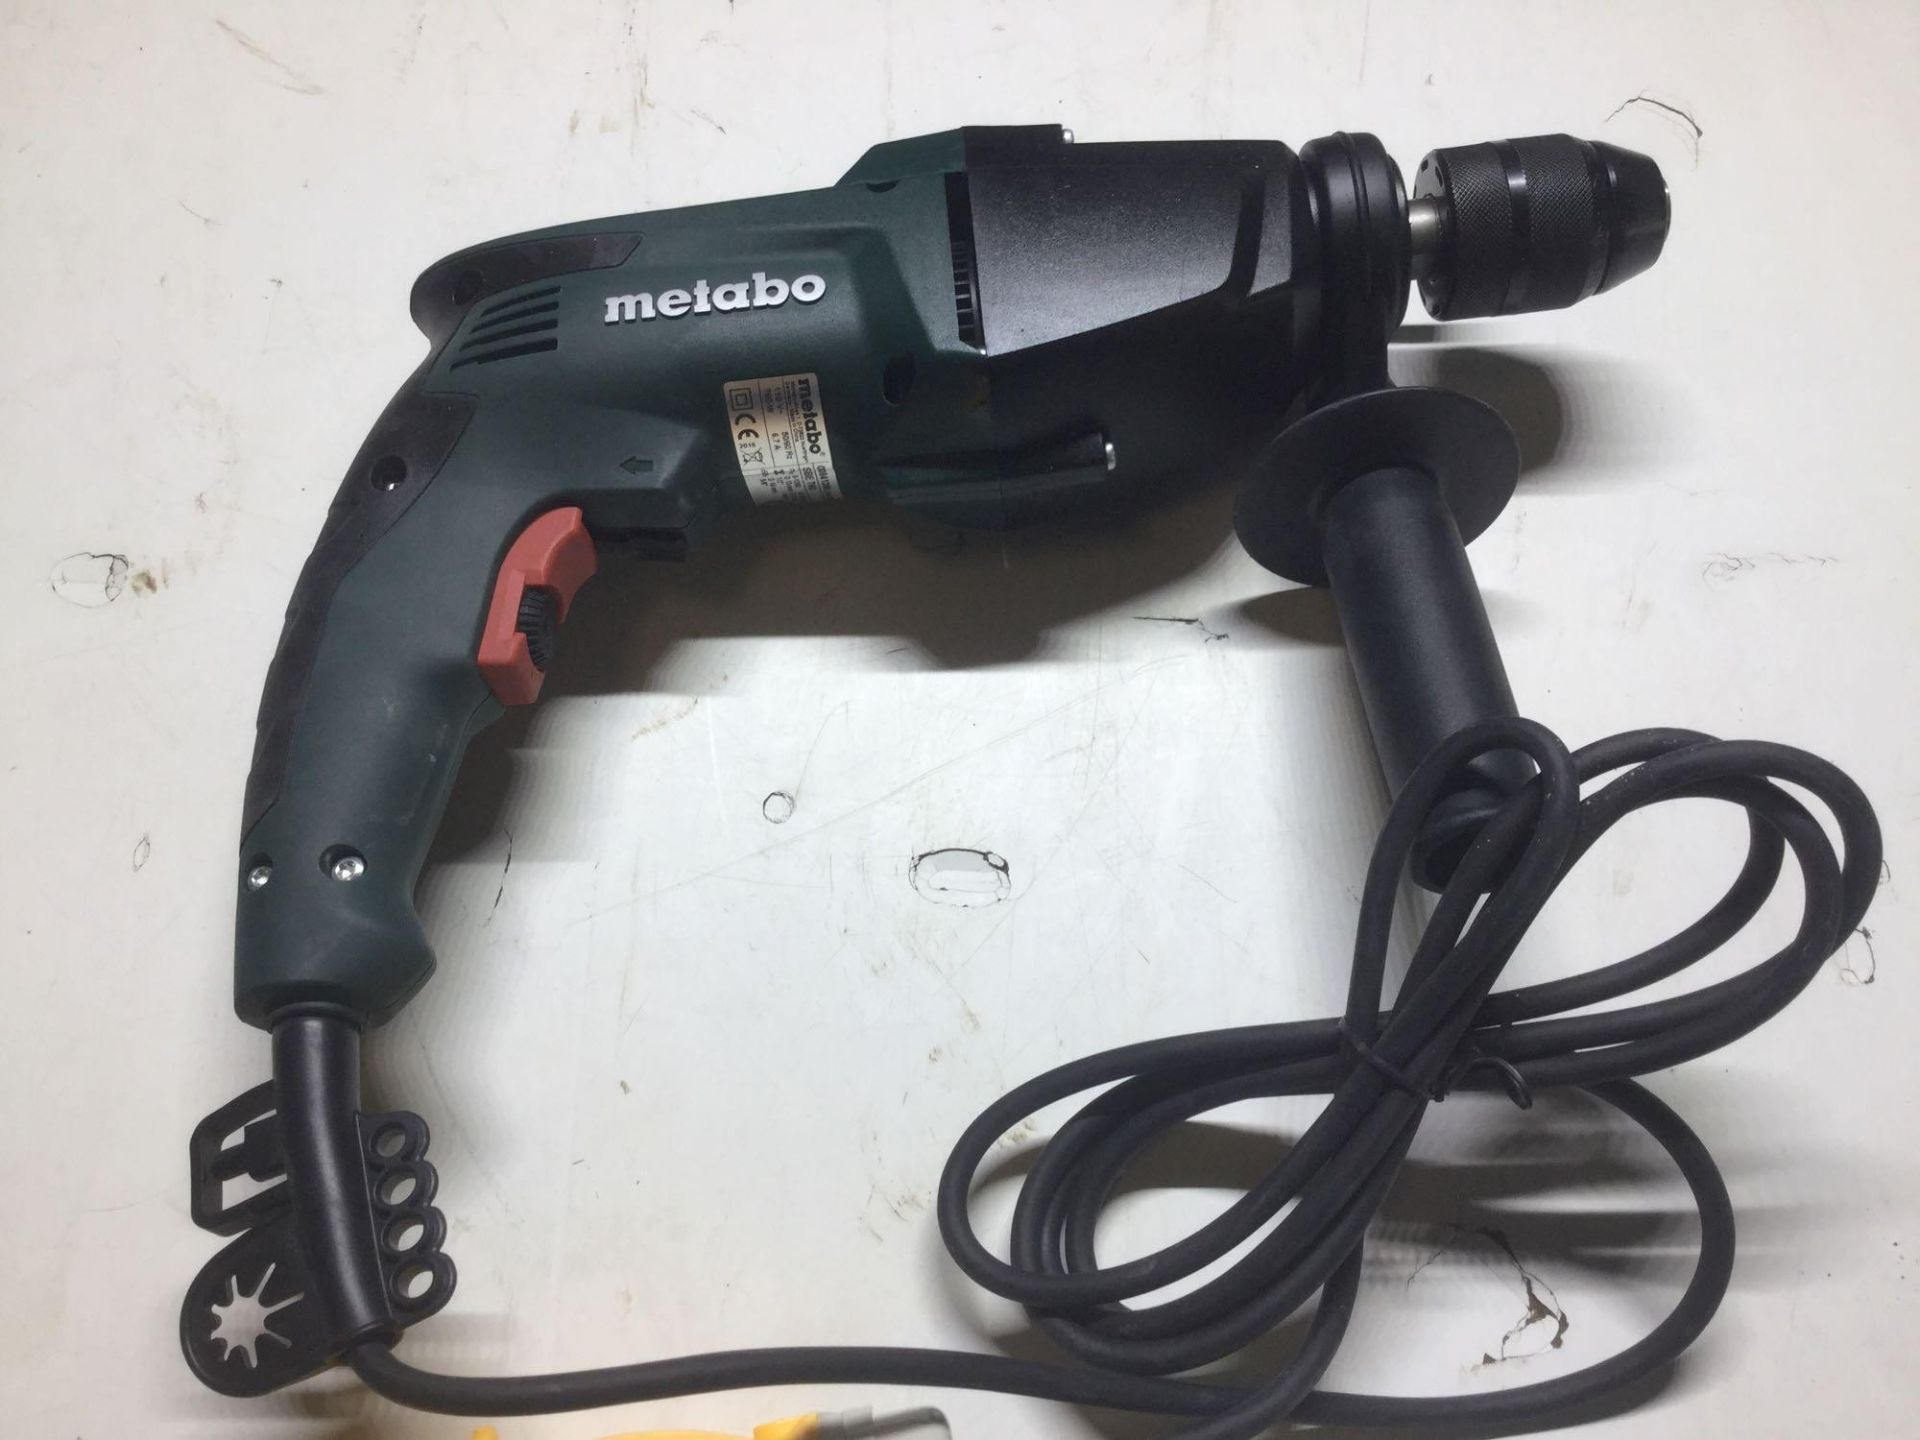 Metabo SBE760 Hammer Drill 110v New in Box - Image 3 of 5